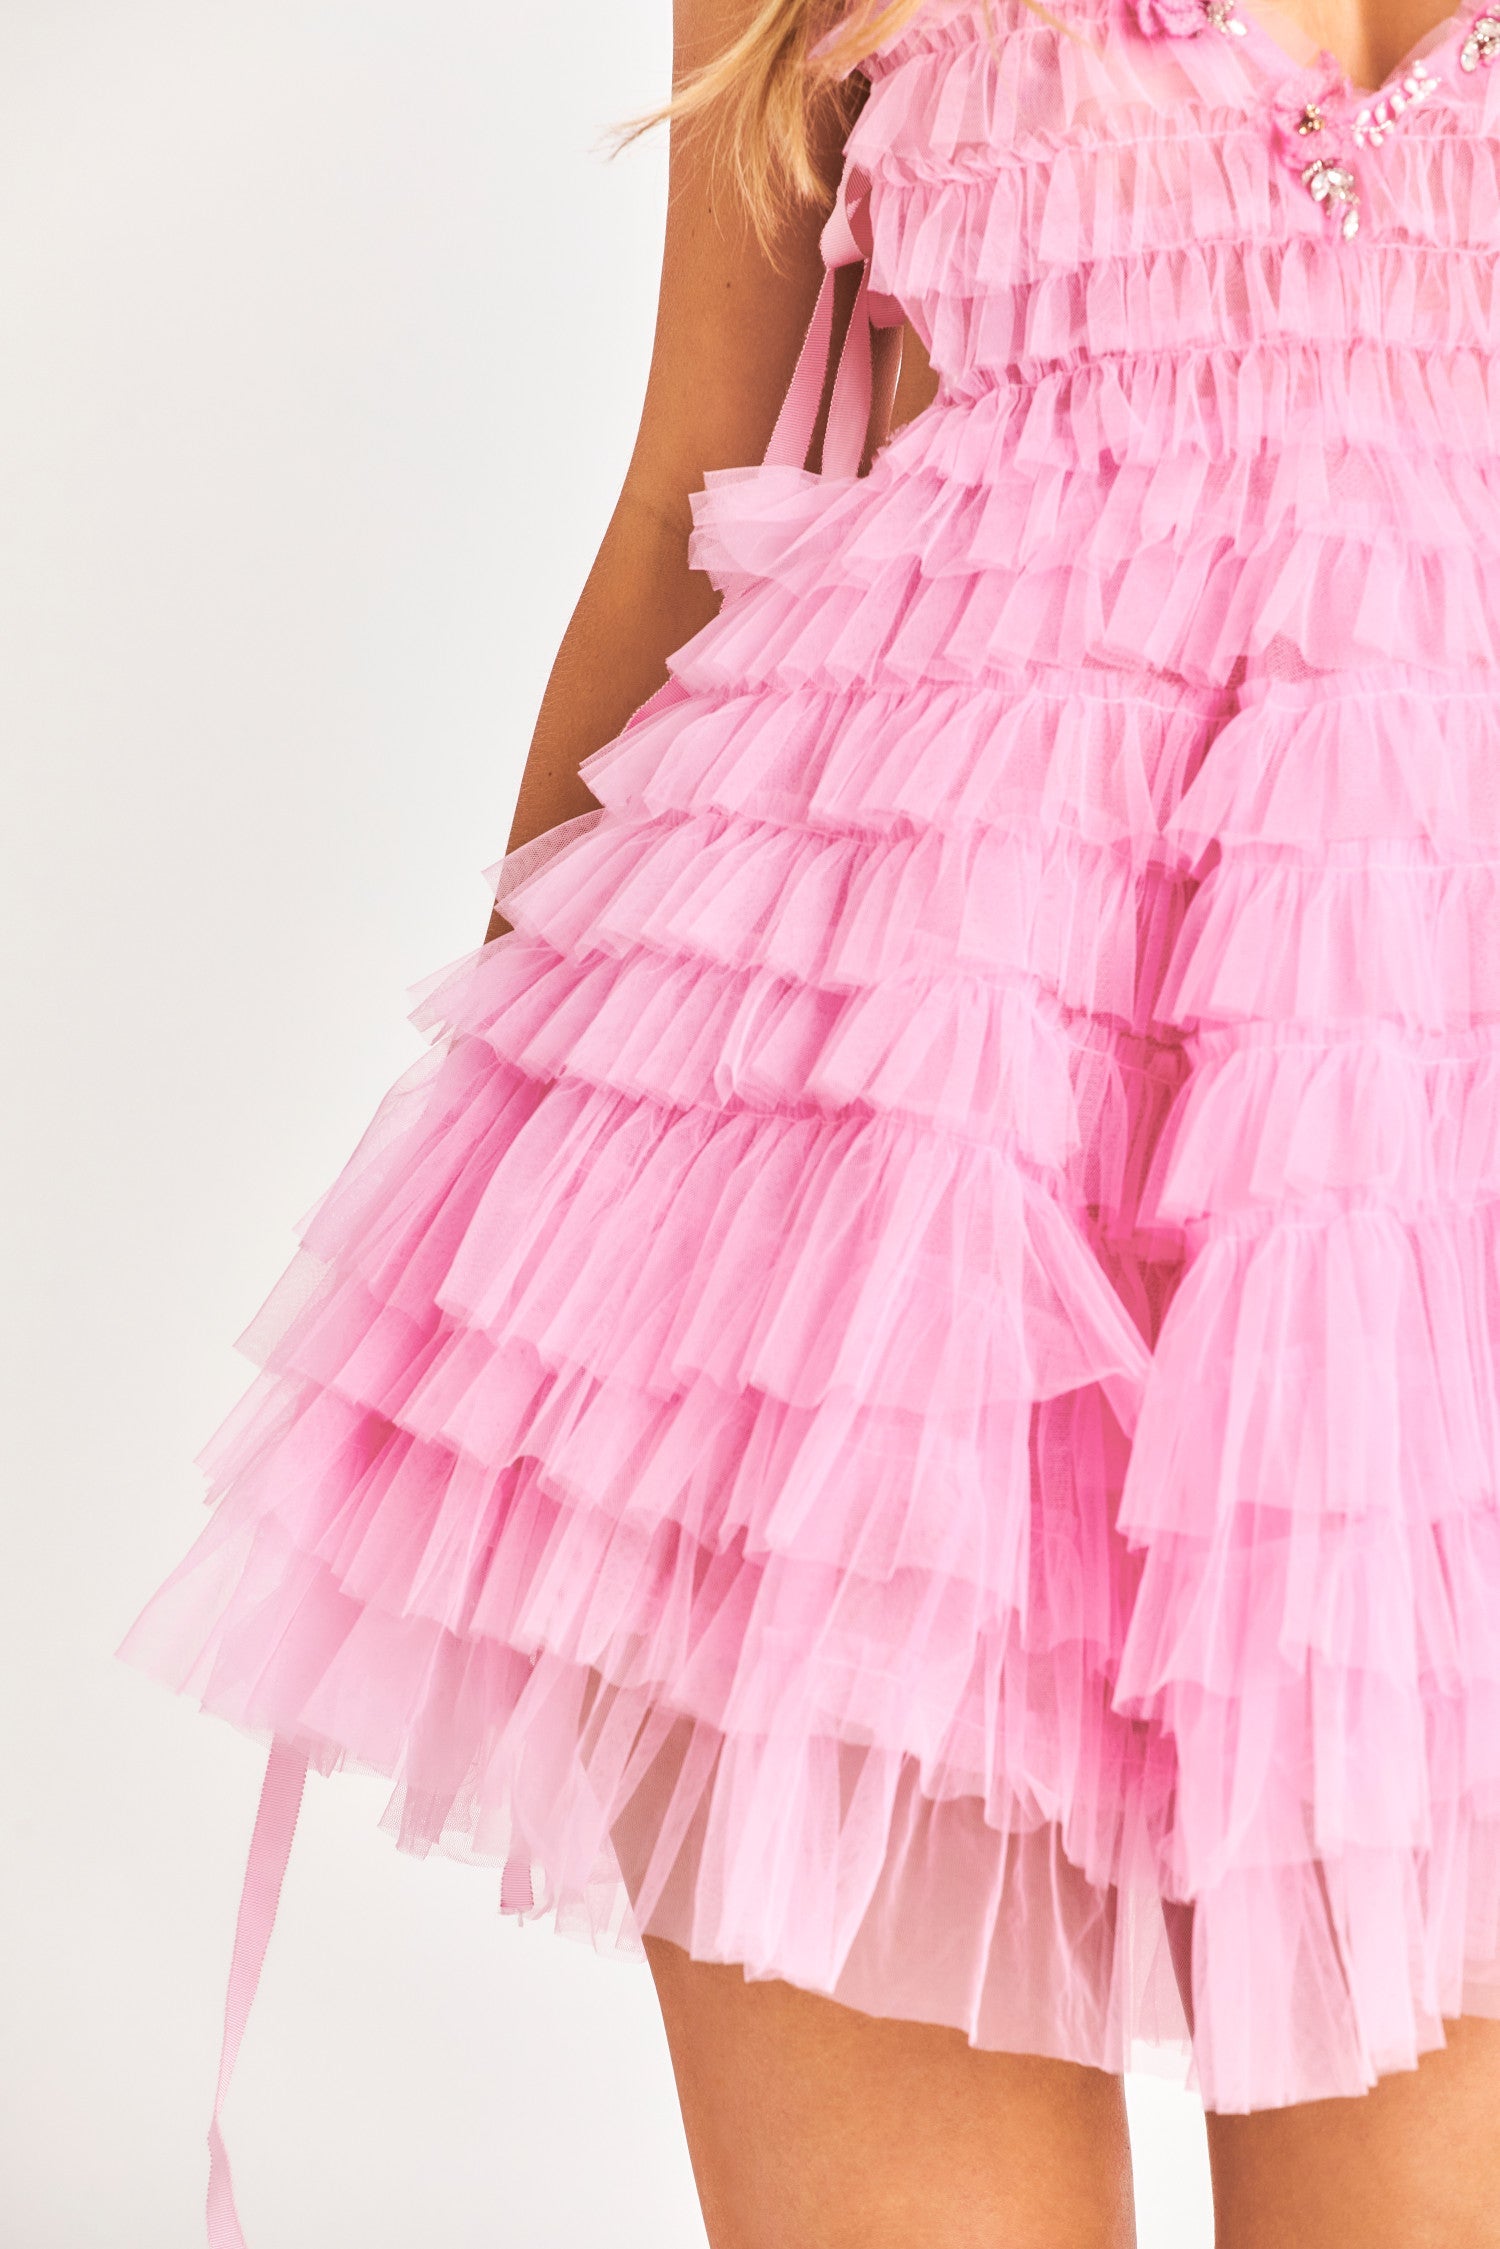 Pink mini dress features tiers of tulle with a plunging v-neckline adorned with rosette appliques and embroideries